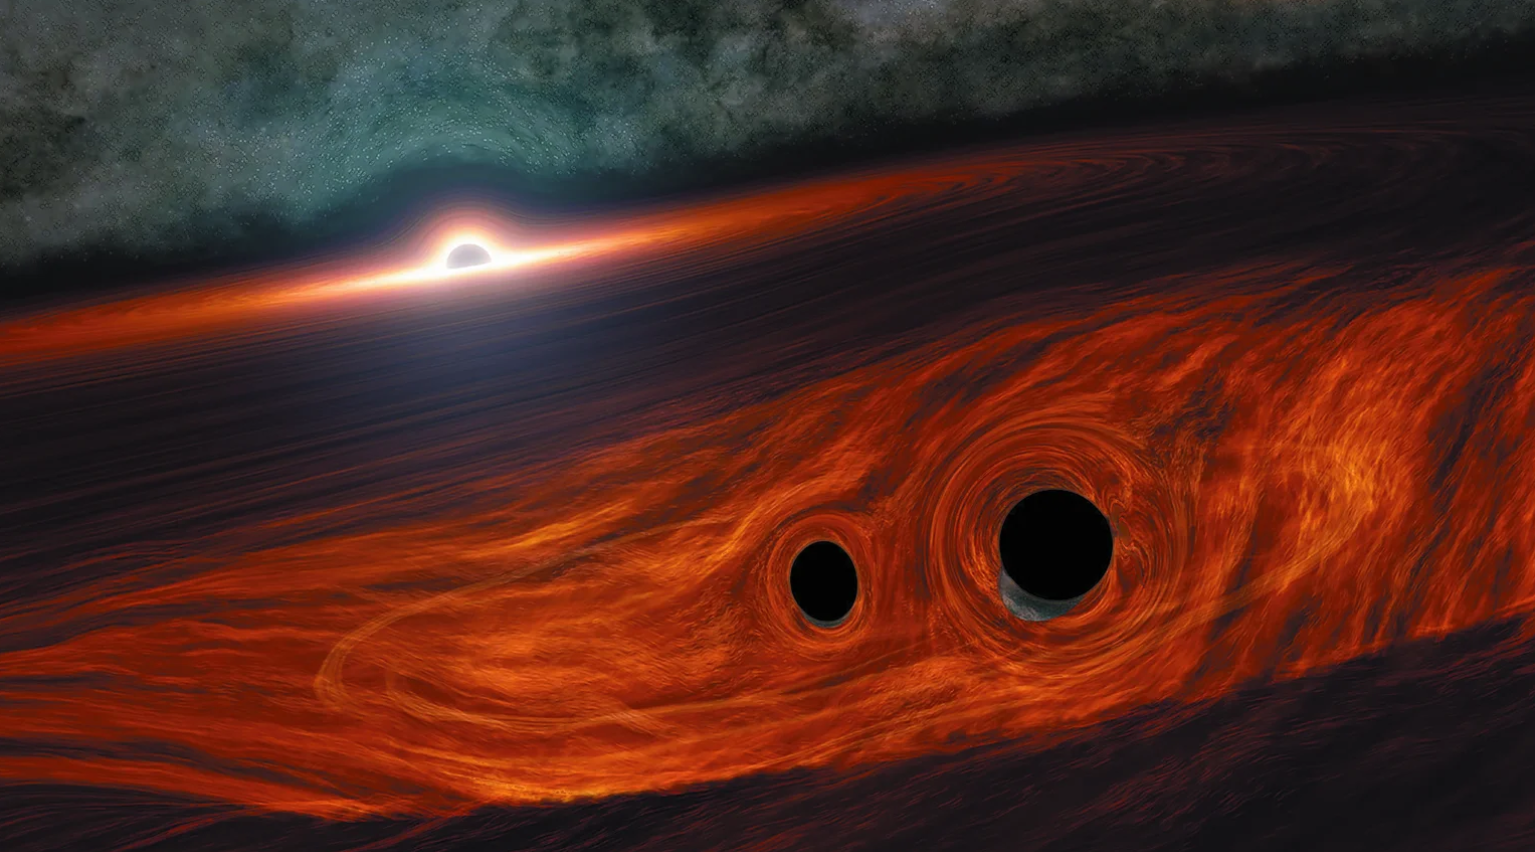 The merger of two black holes staggering speed of 3 million miles per hour resulted in the formation of a significantly larger black hole.